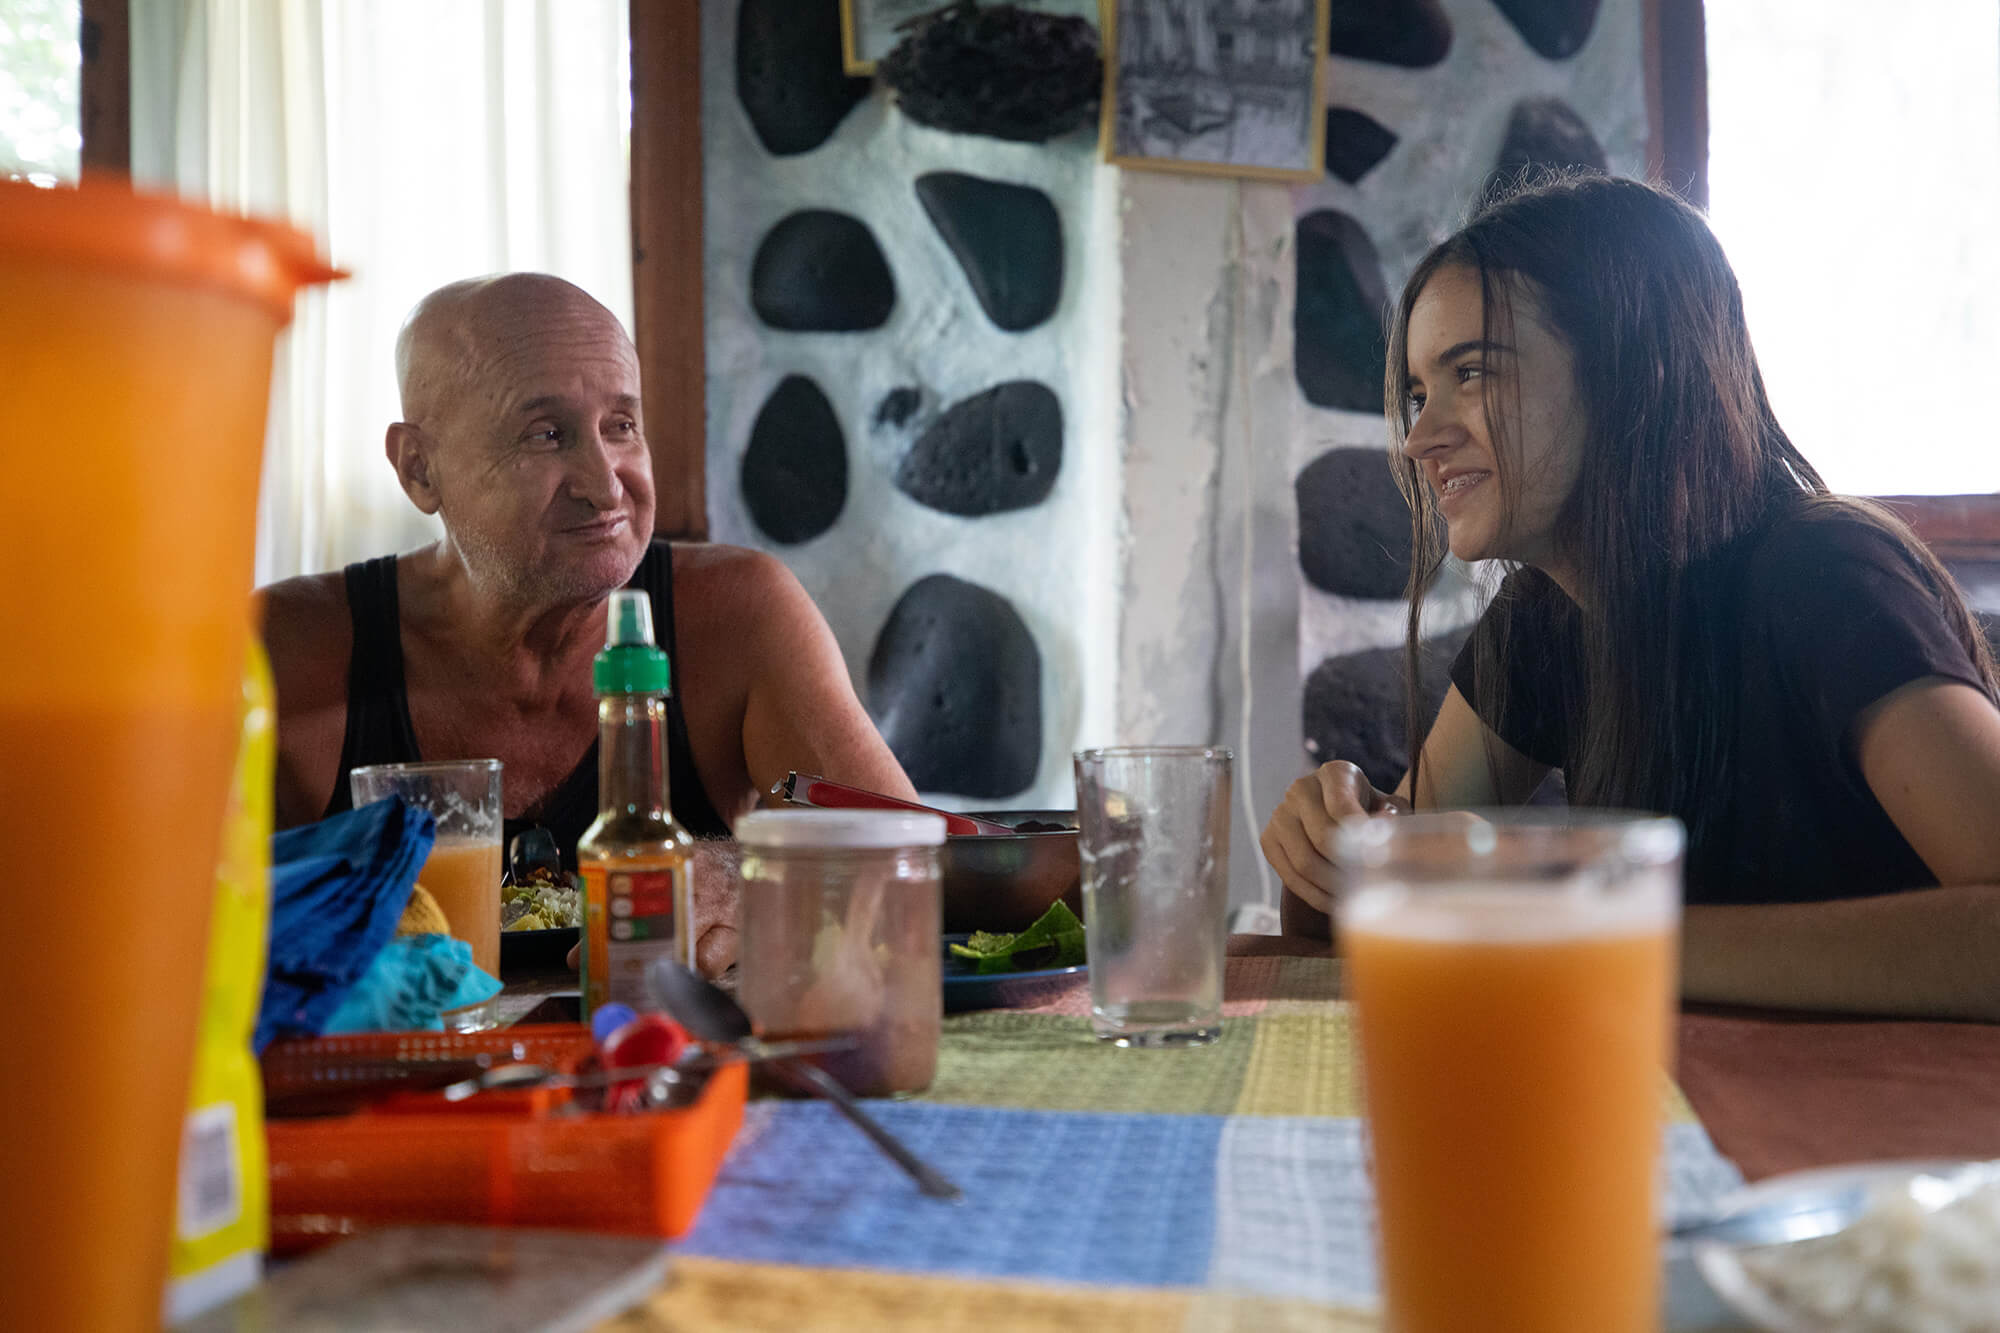 Germán, Alava’s husband (left), and her daughter, Laura, smile at each other as they sit at the family’s kitchen table for lunch. In the foreground, there is a cup of juice and an orange container. Germán is wearing a black tank top, and Laura is wearing a black shirt. Behind them, the white walls, dotted with black volcanic rock, can be seen. A drawing of a boat hangs above Germán and Laura on the wall.